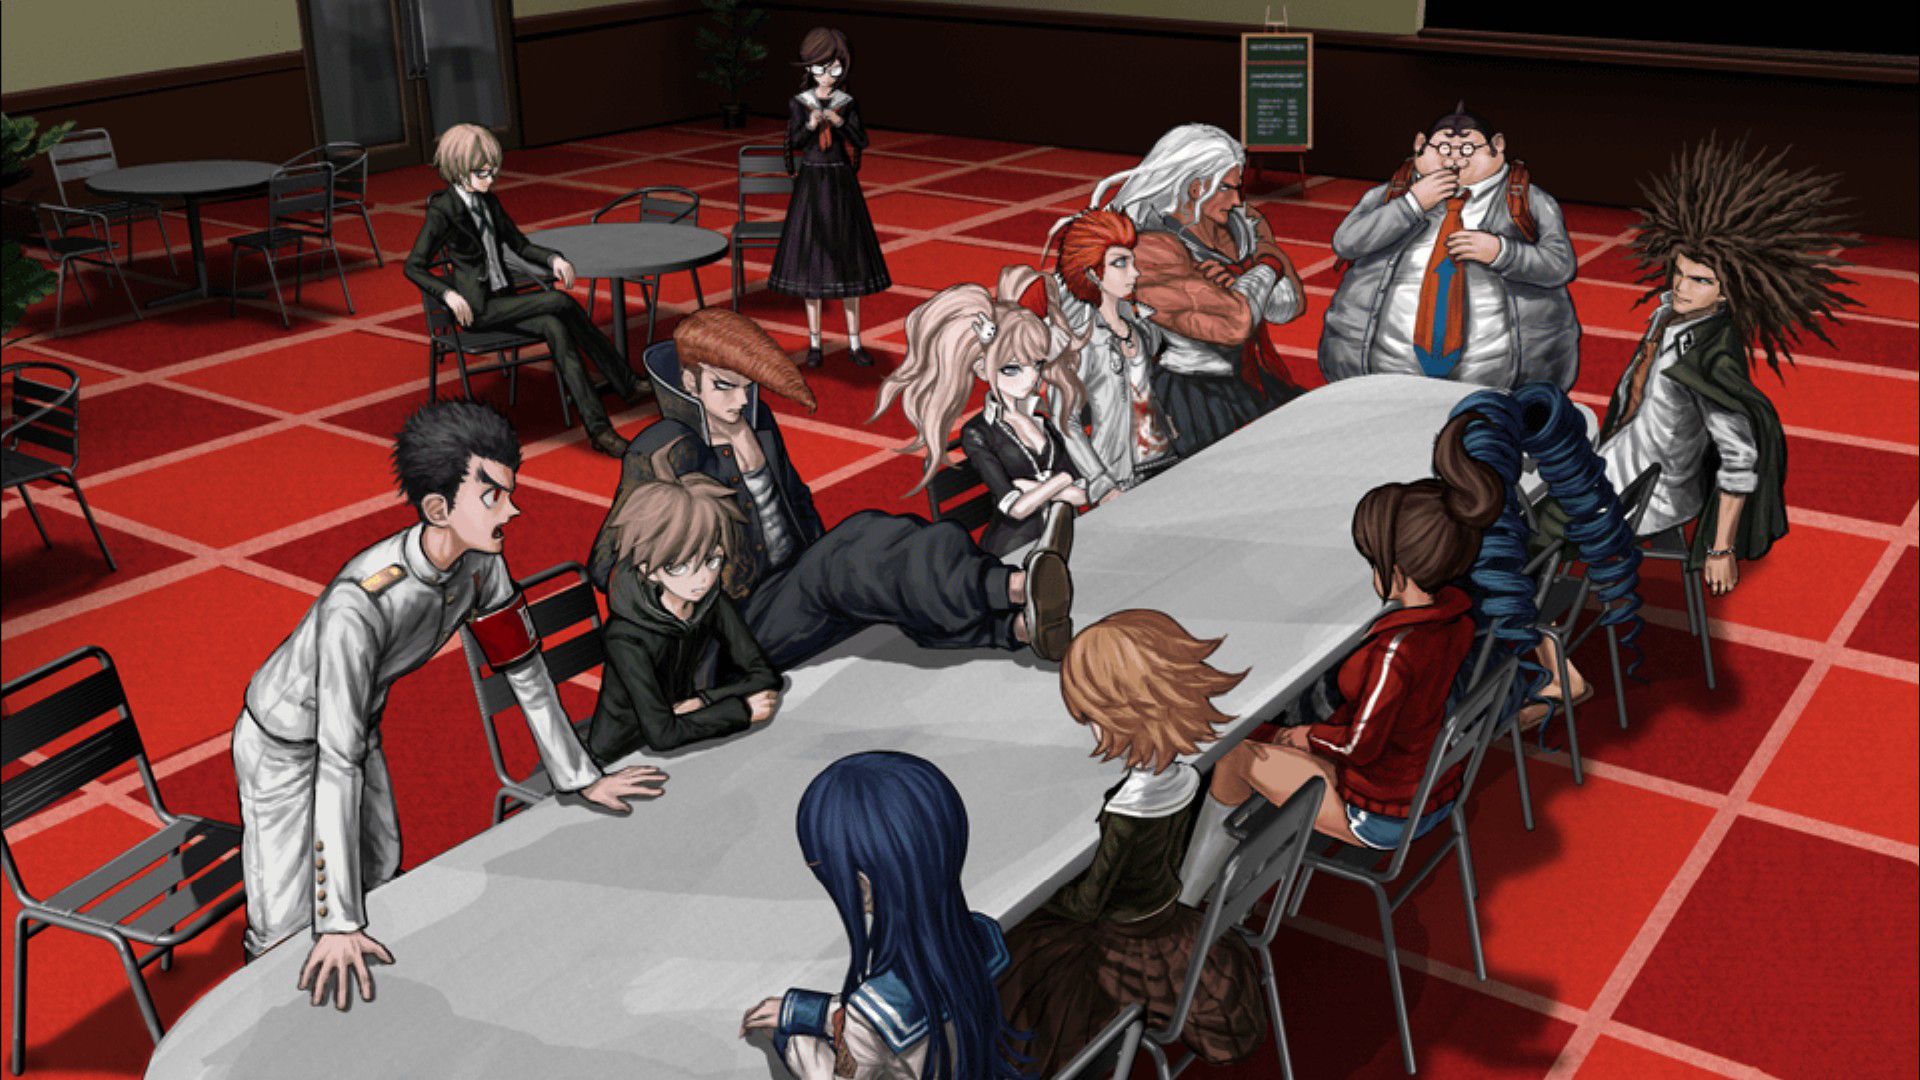 Discussion at the table. Wallpaper from Danganronpa: Trigger Happy